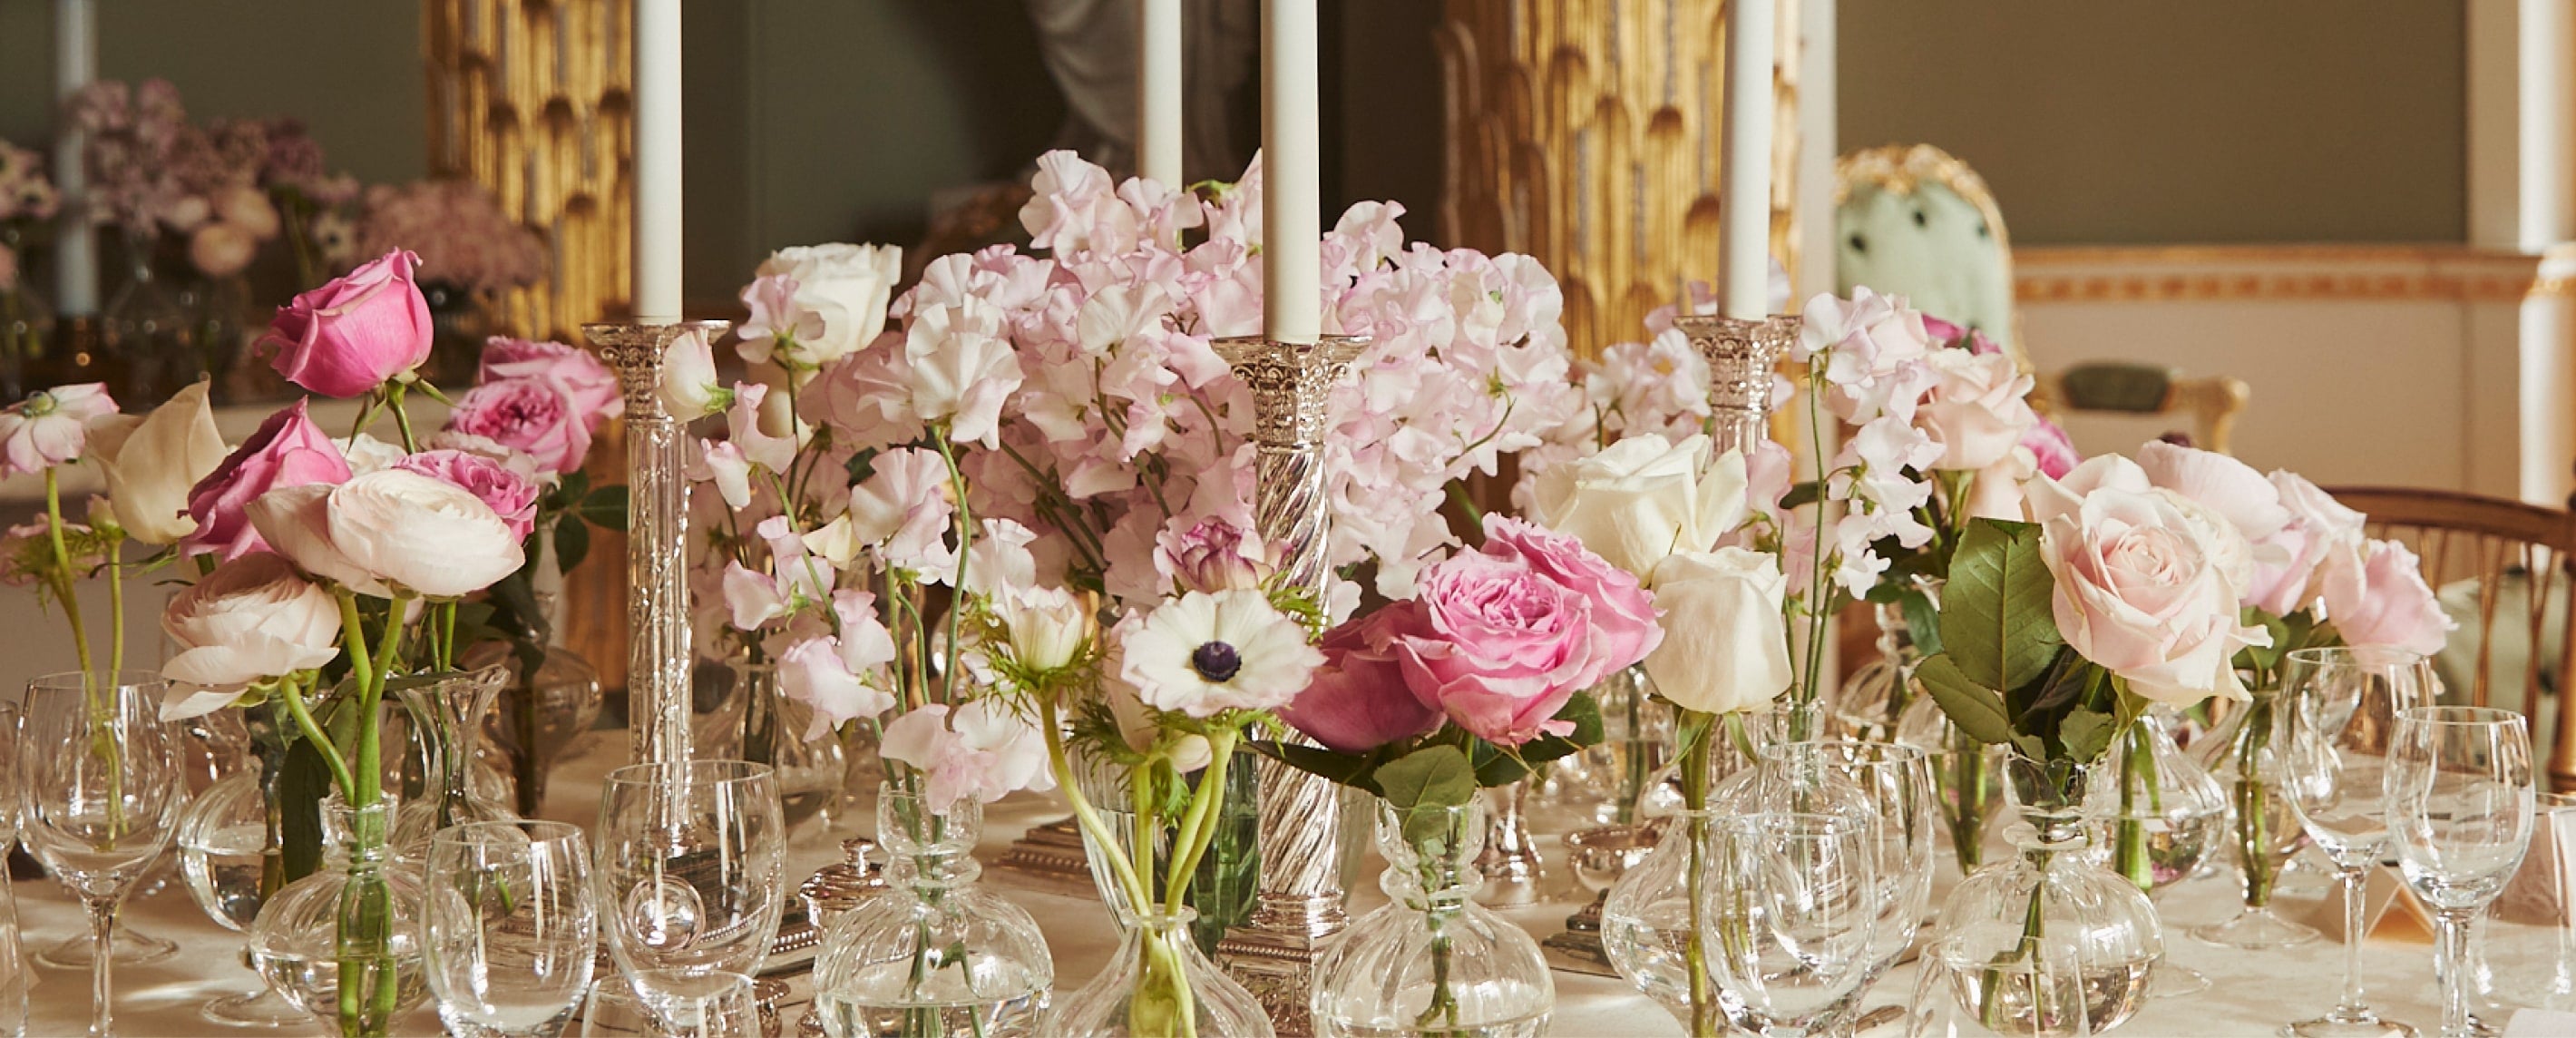 Pink and white wedding flower display